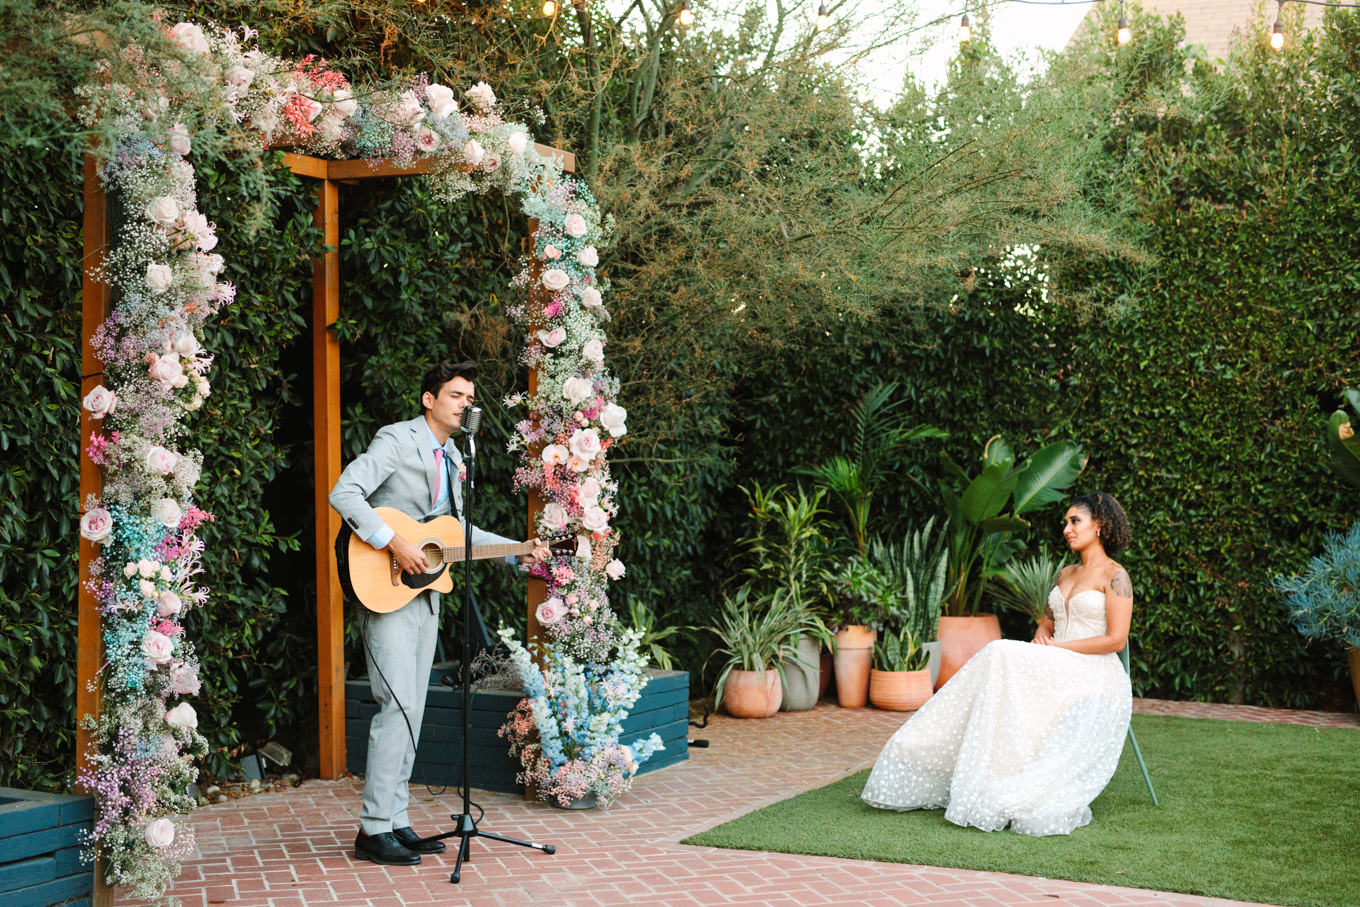 Groom serenading the bride | Colorful pop-up micro wedding at The Ruby Street Los Angeles featured on Green Wedding Shoes | Colorful and elevated photography for fun-loving couples in Southern California | #colorfulwedding #popupwedding #weddingphotography #microwedding Source: Mary Costa Photography | Los Angeles